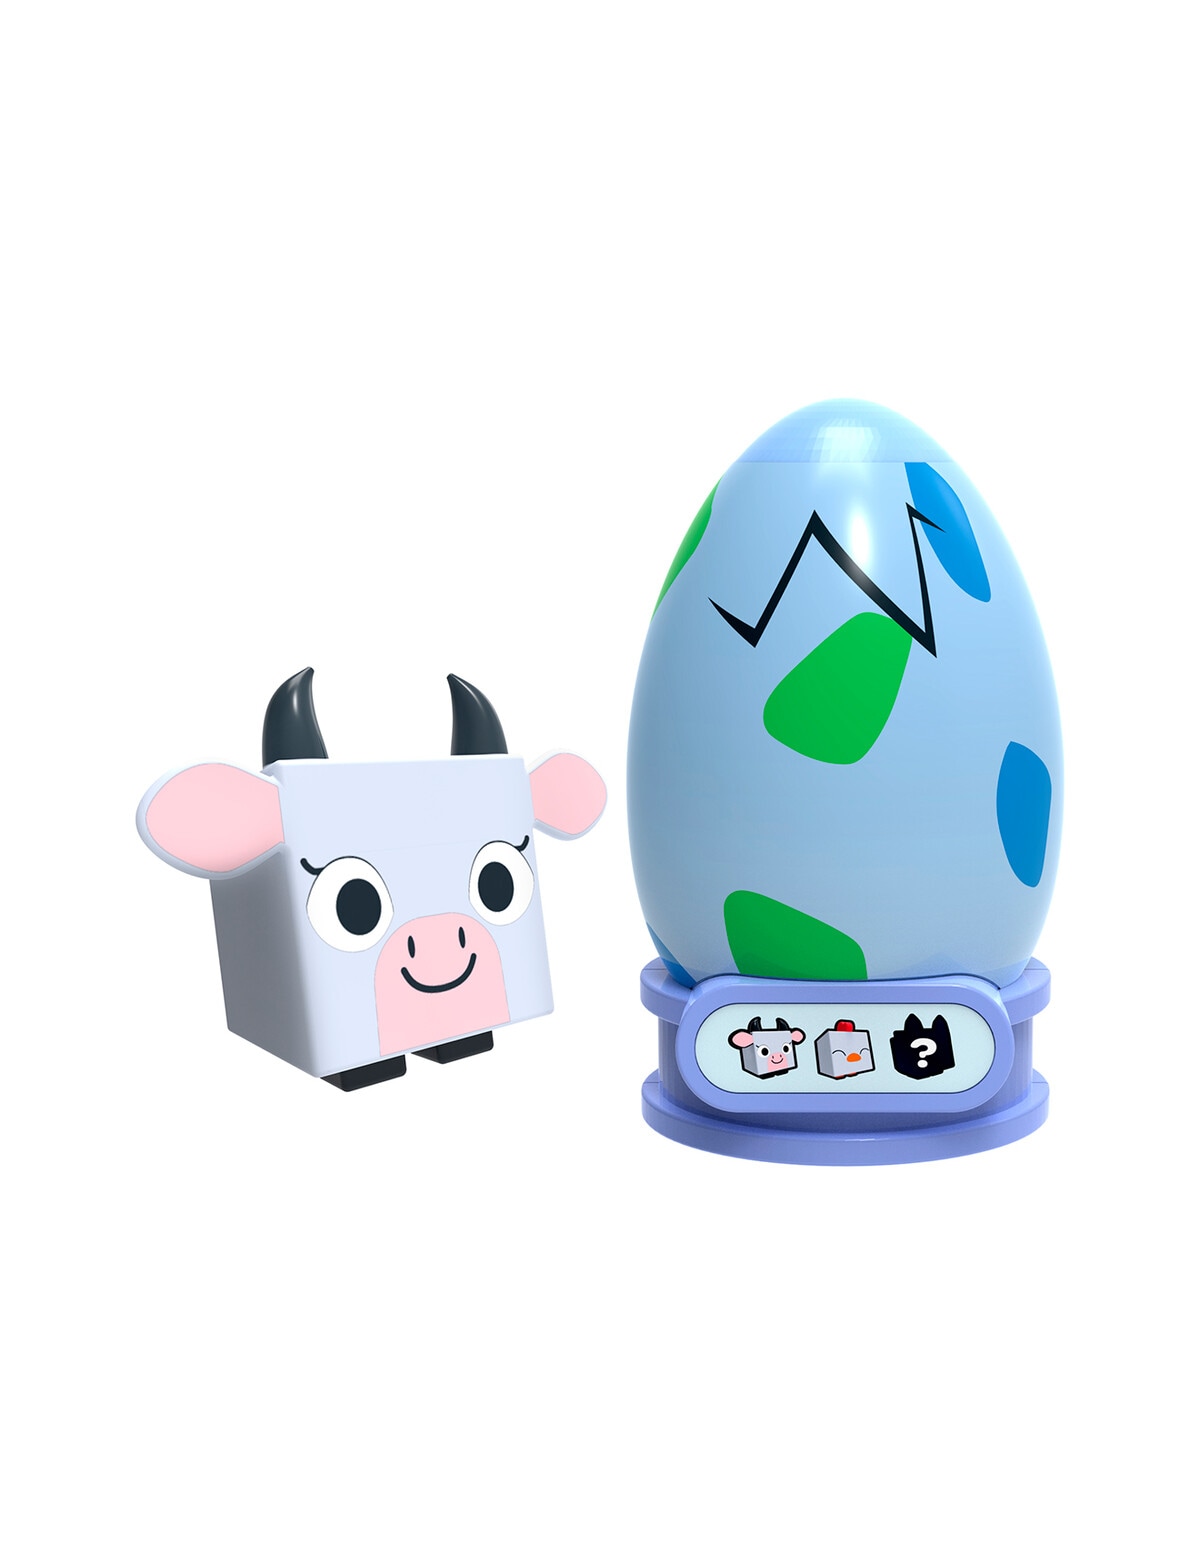 Pet Simulator X - Mystery Pet Minifigures 2-Pack (Two Mystery Eggs & Pet  Figures, Series 1) [Includes DLC]